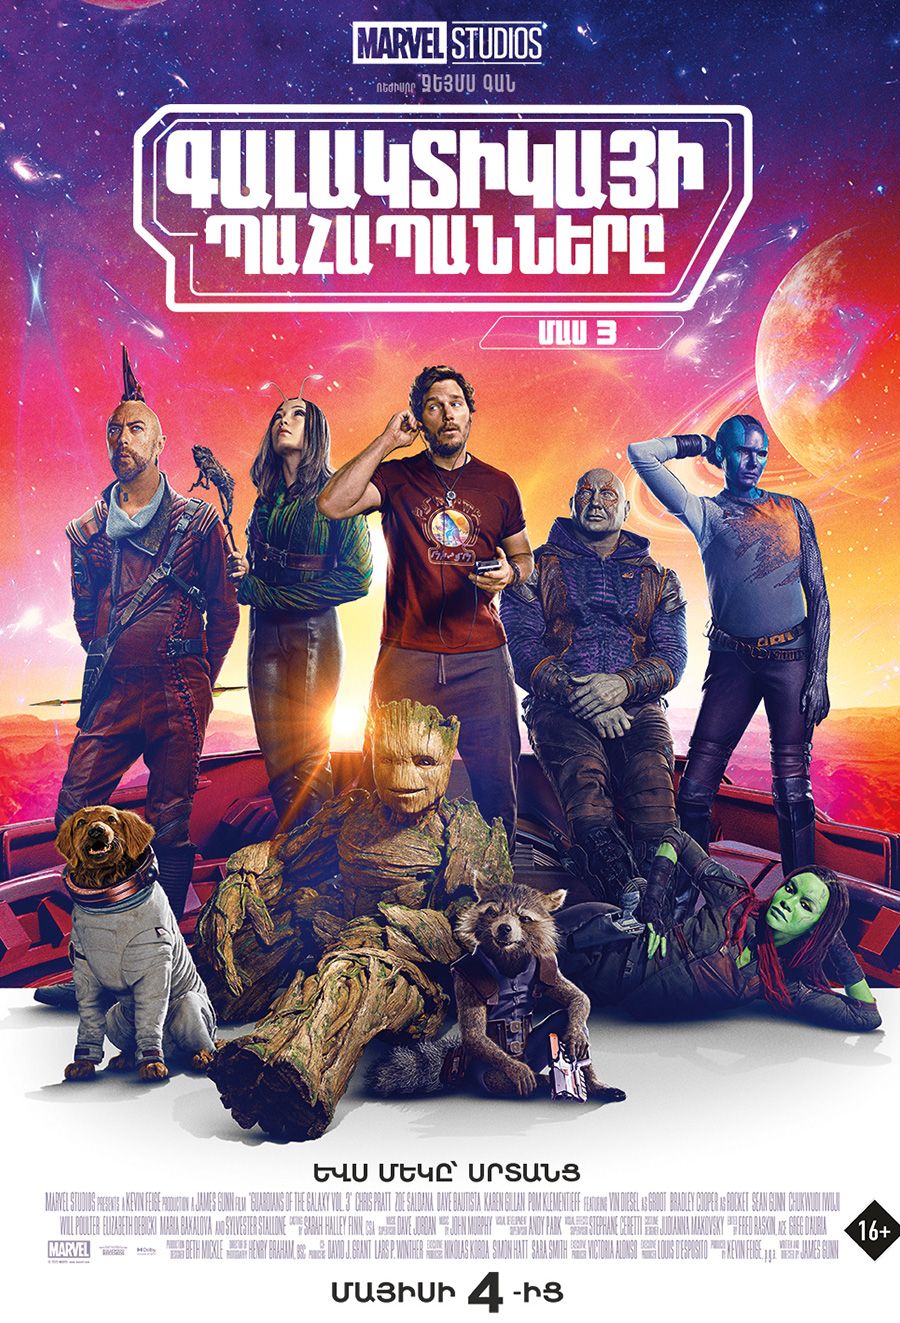 guardians-of-the-galaxy-volume-3